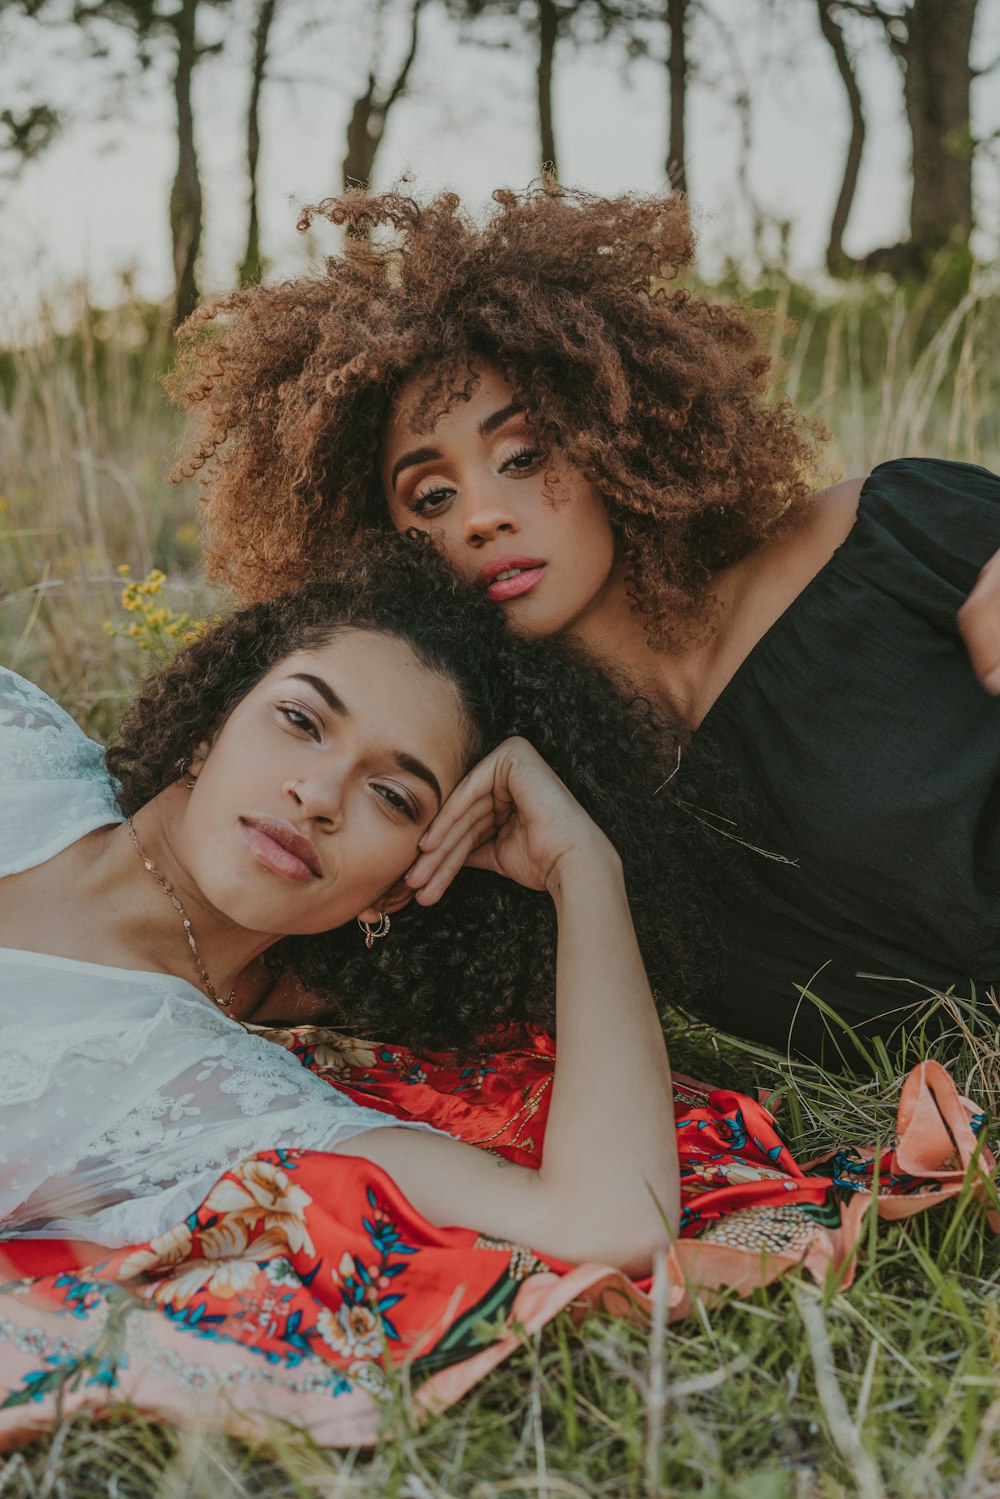 two women laying on a blanket in the grass